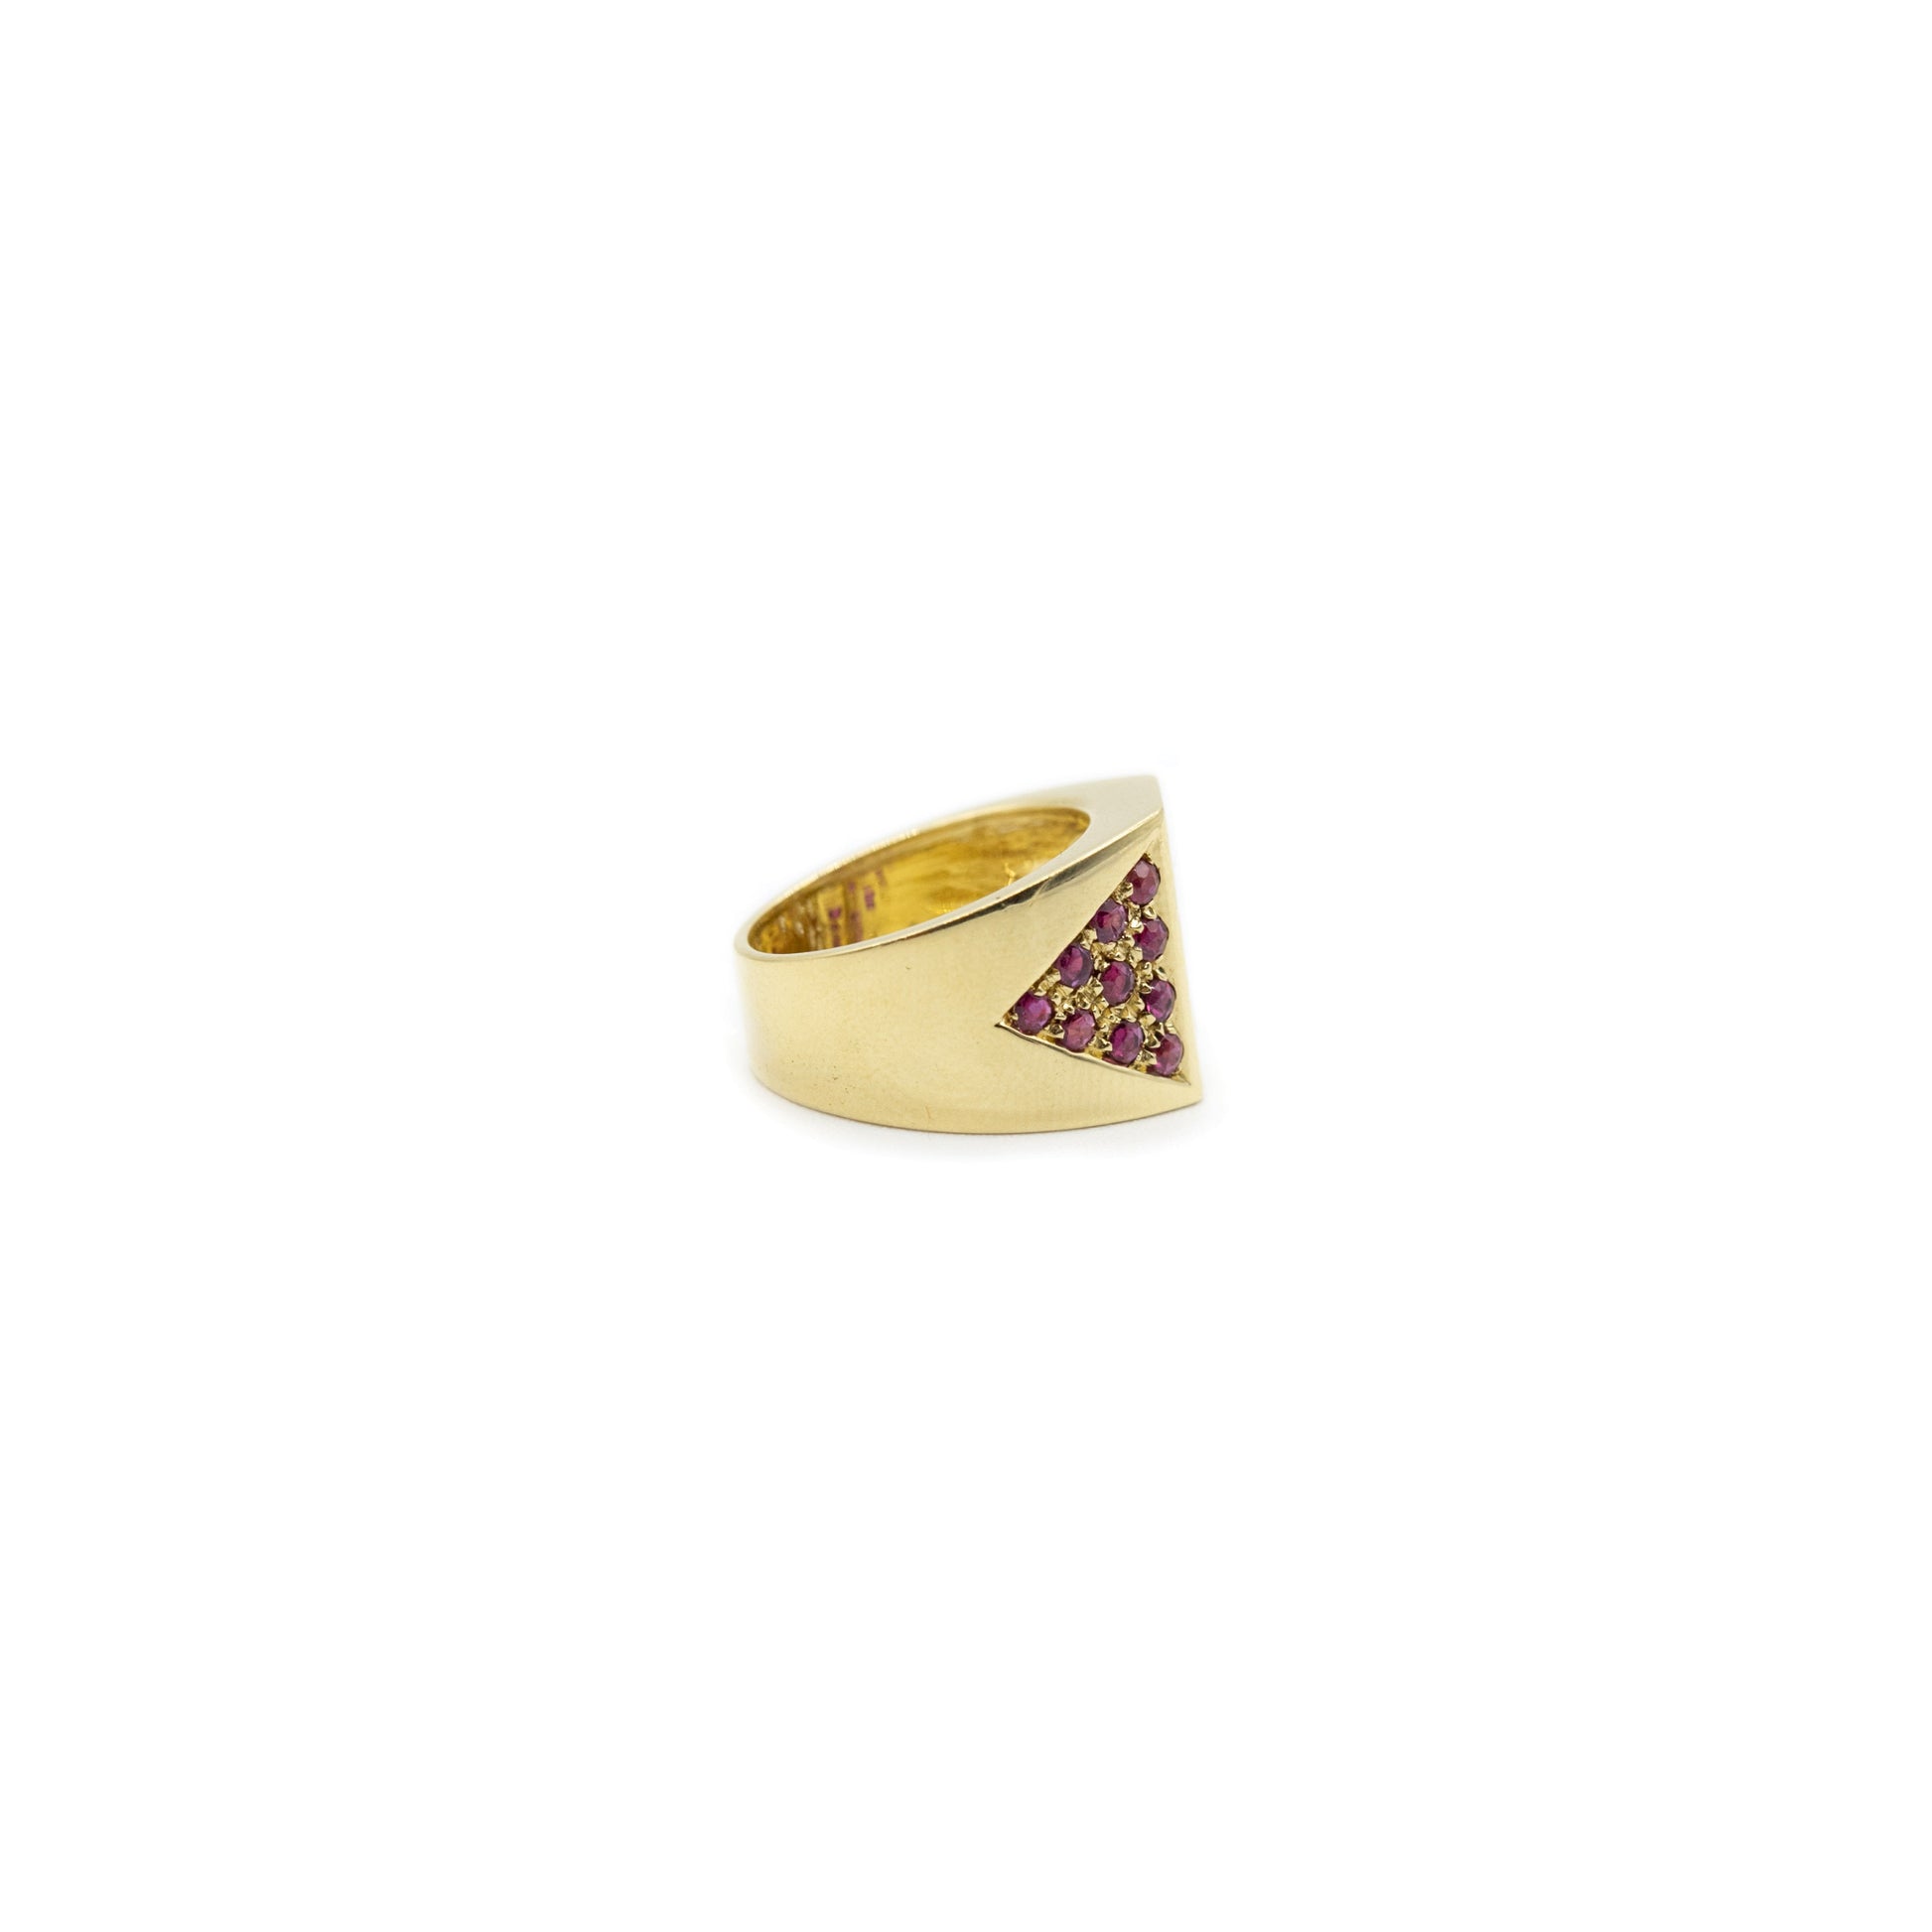 Vintage Gold Diamond Ring from 18ct Yellow Gold for Women| Elettra | Vintage Jewelry | Lil Milan